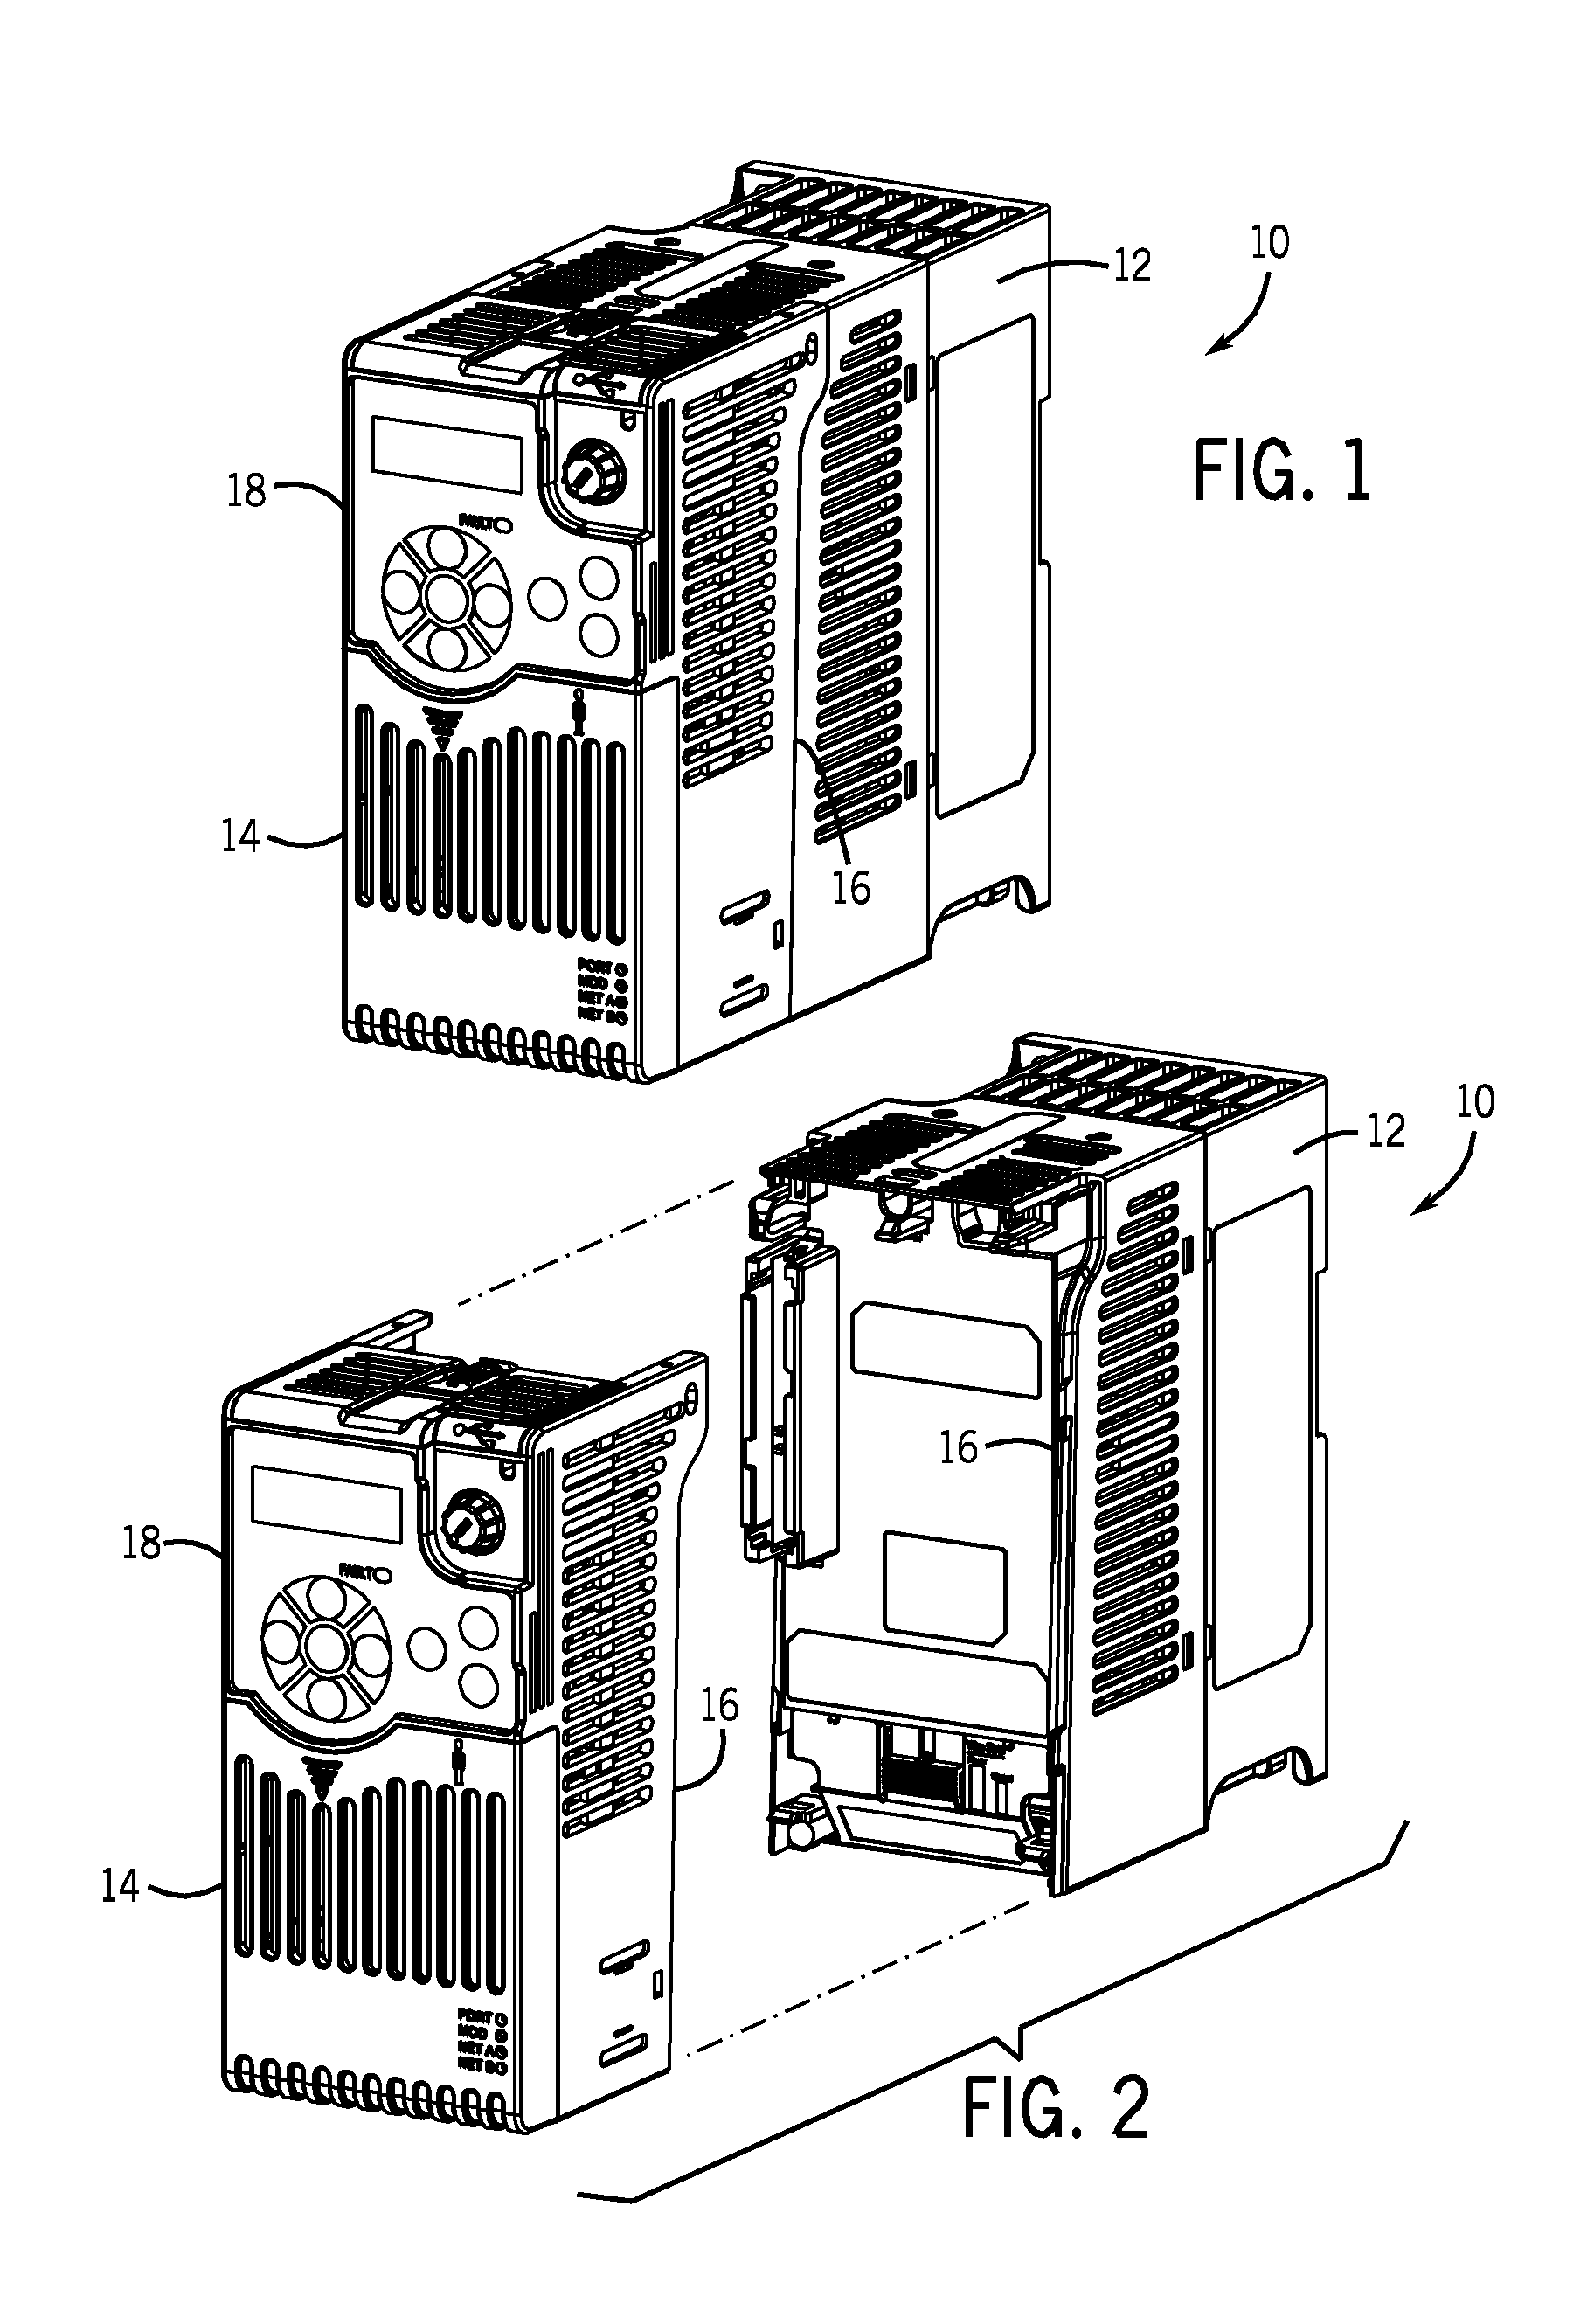 Motor drive configuration system and method